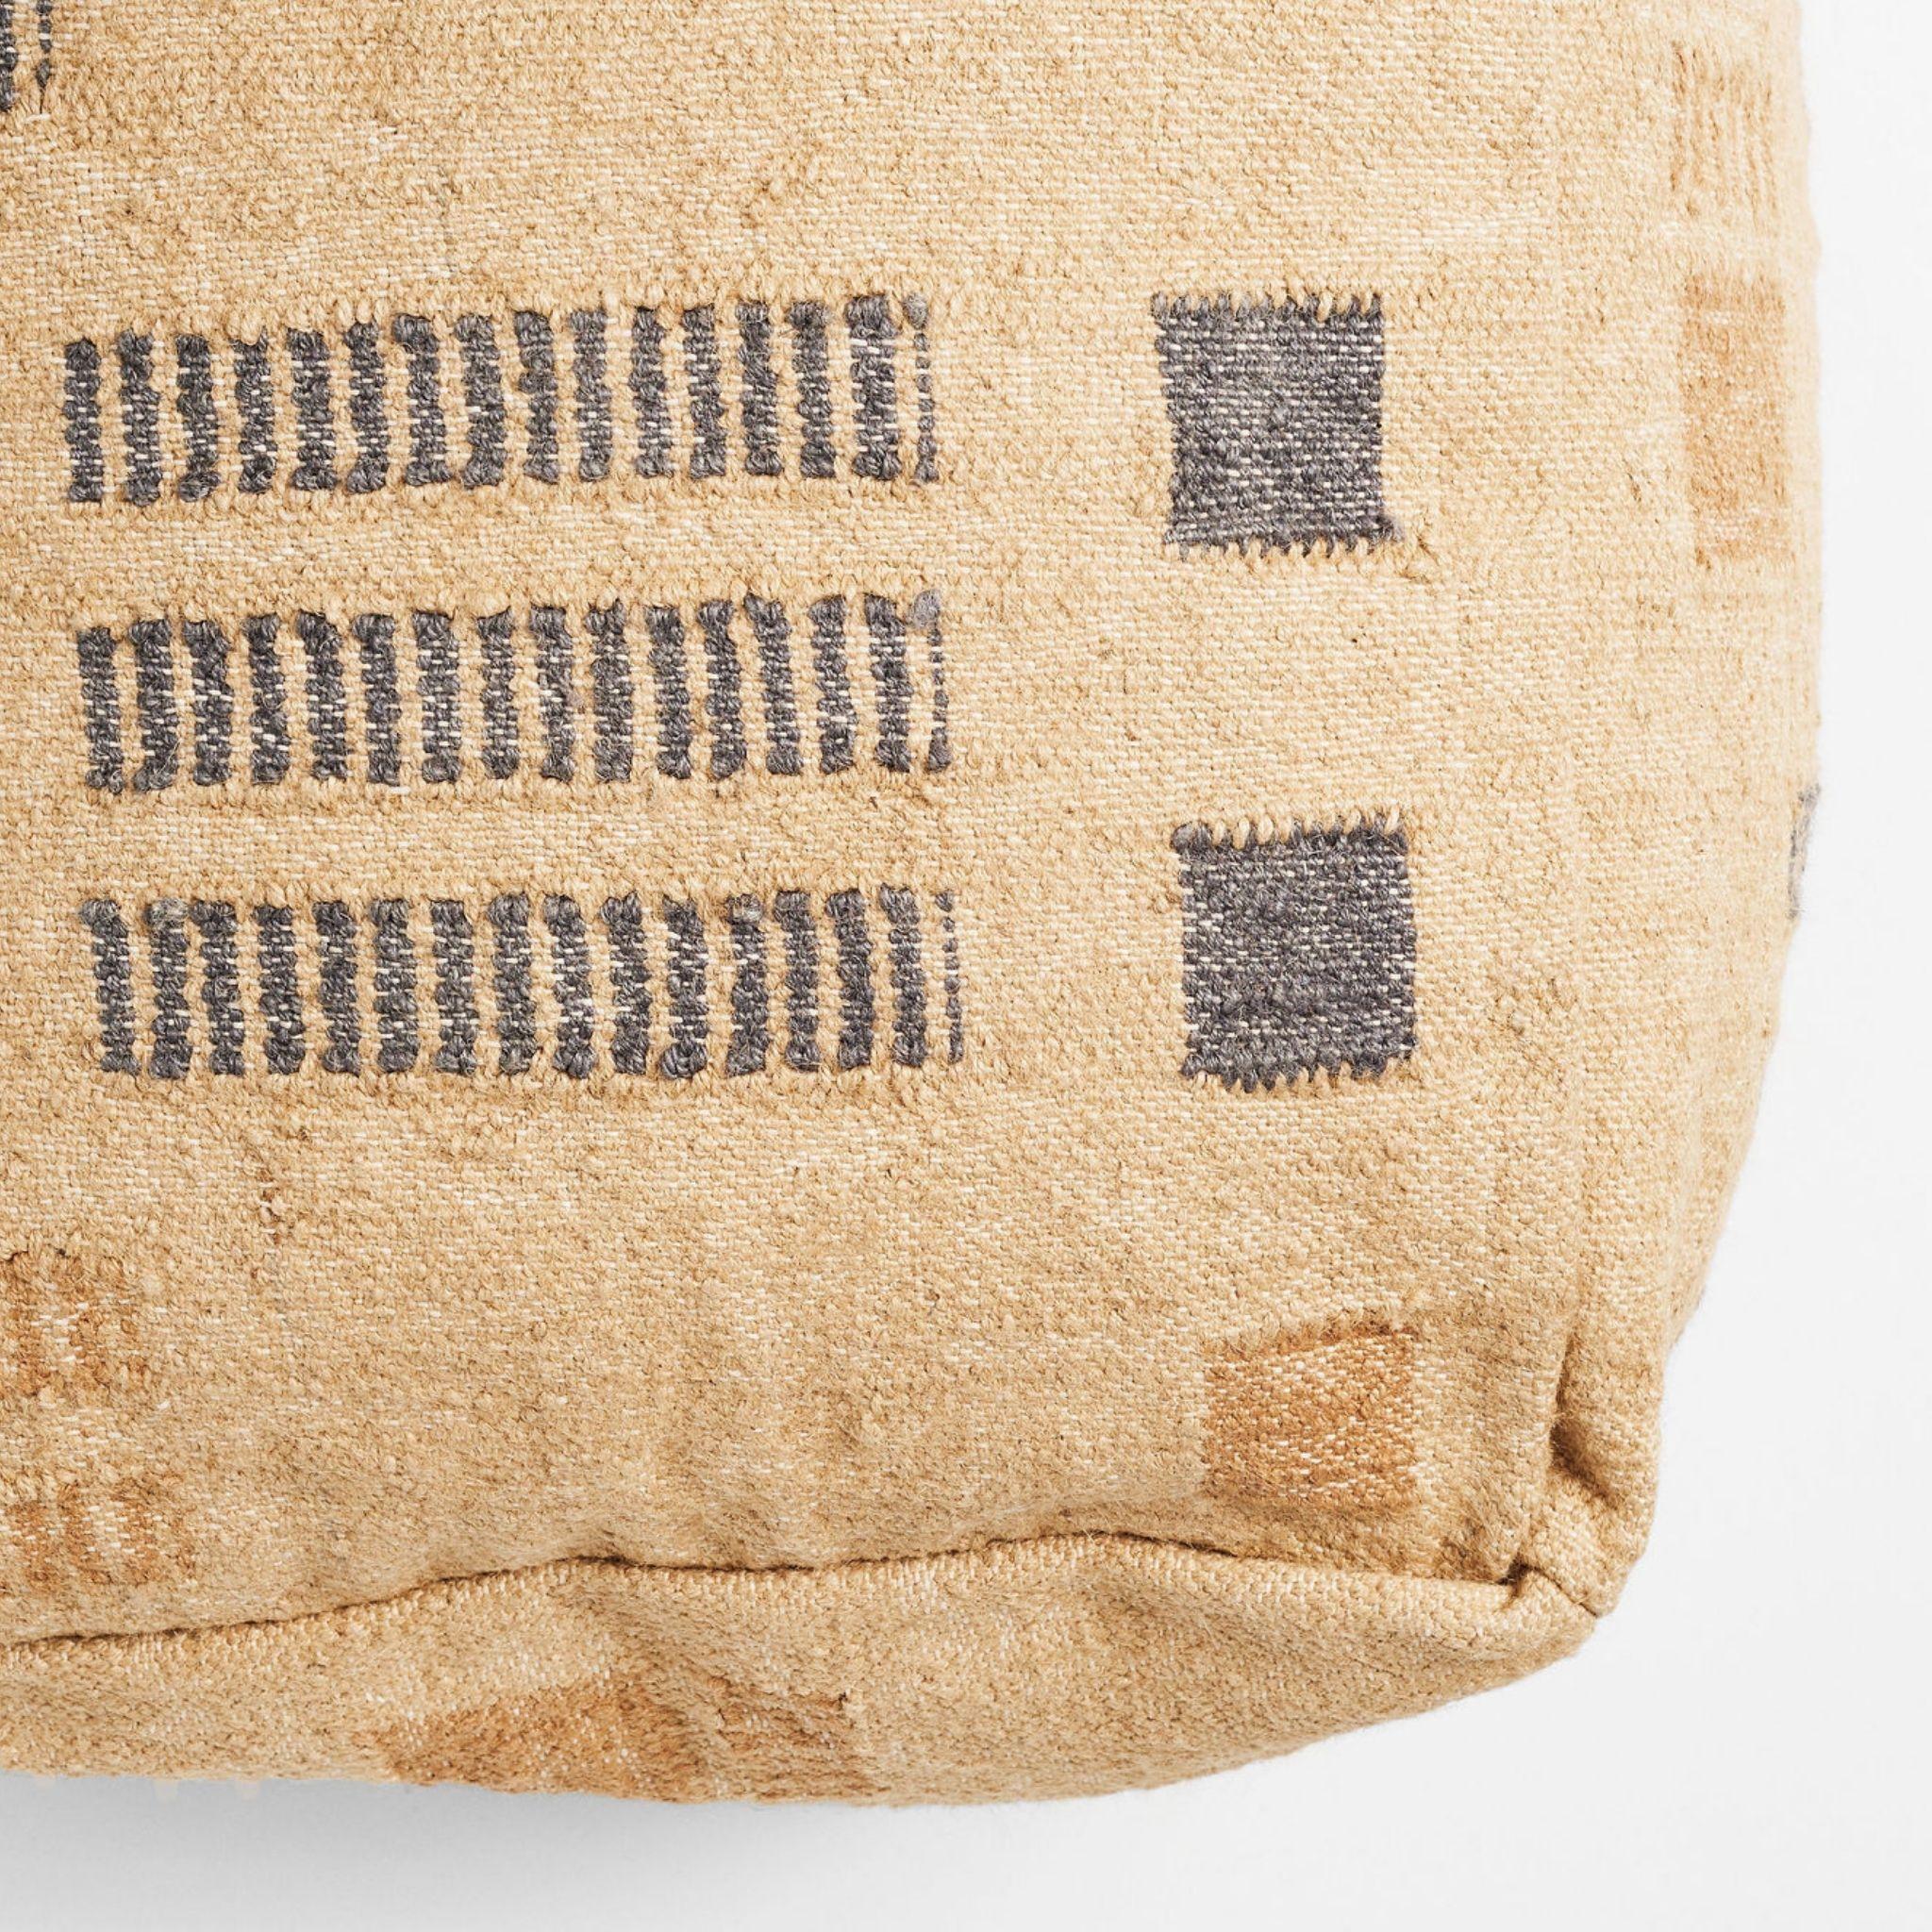 Hand-Woven Wheat Pouf Handwoven In Jute And Cotton By Artisans In Soft Earthy Hues For Sale